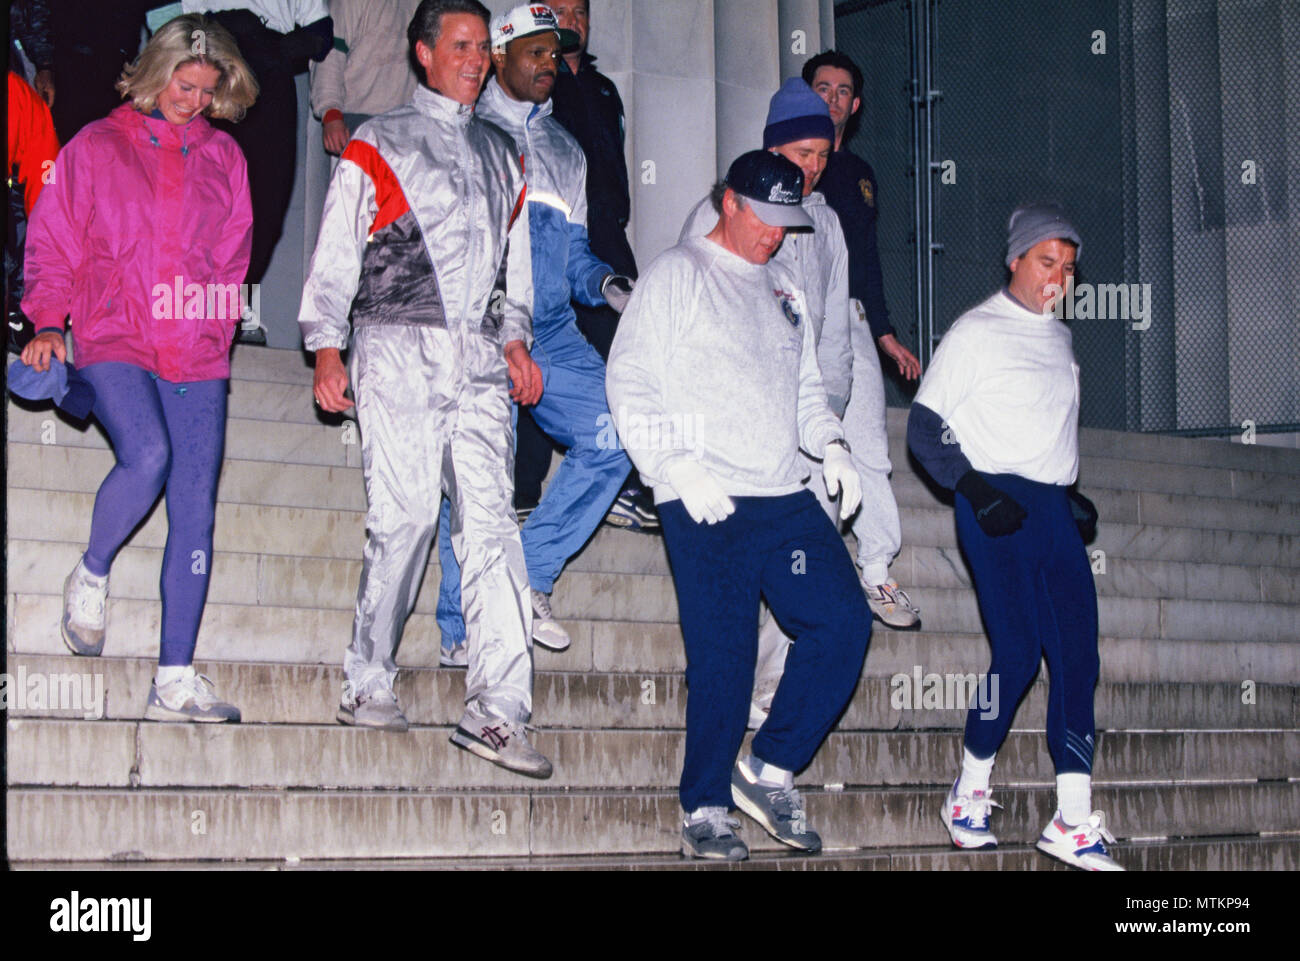 Washington DC 1993/01/22  President William Jefferson Clinton takes an early morning jog and runs down the steps of the Lincoln Memorial  Photograph by Dennis Brack Stock Photo